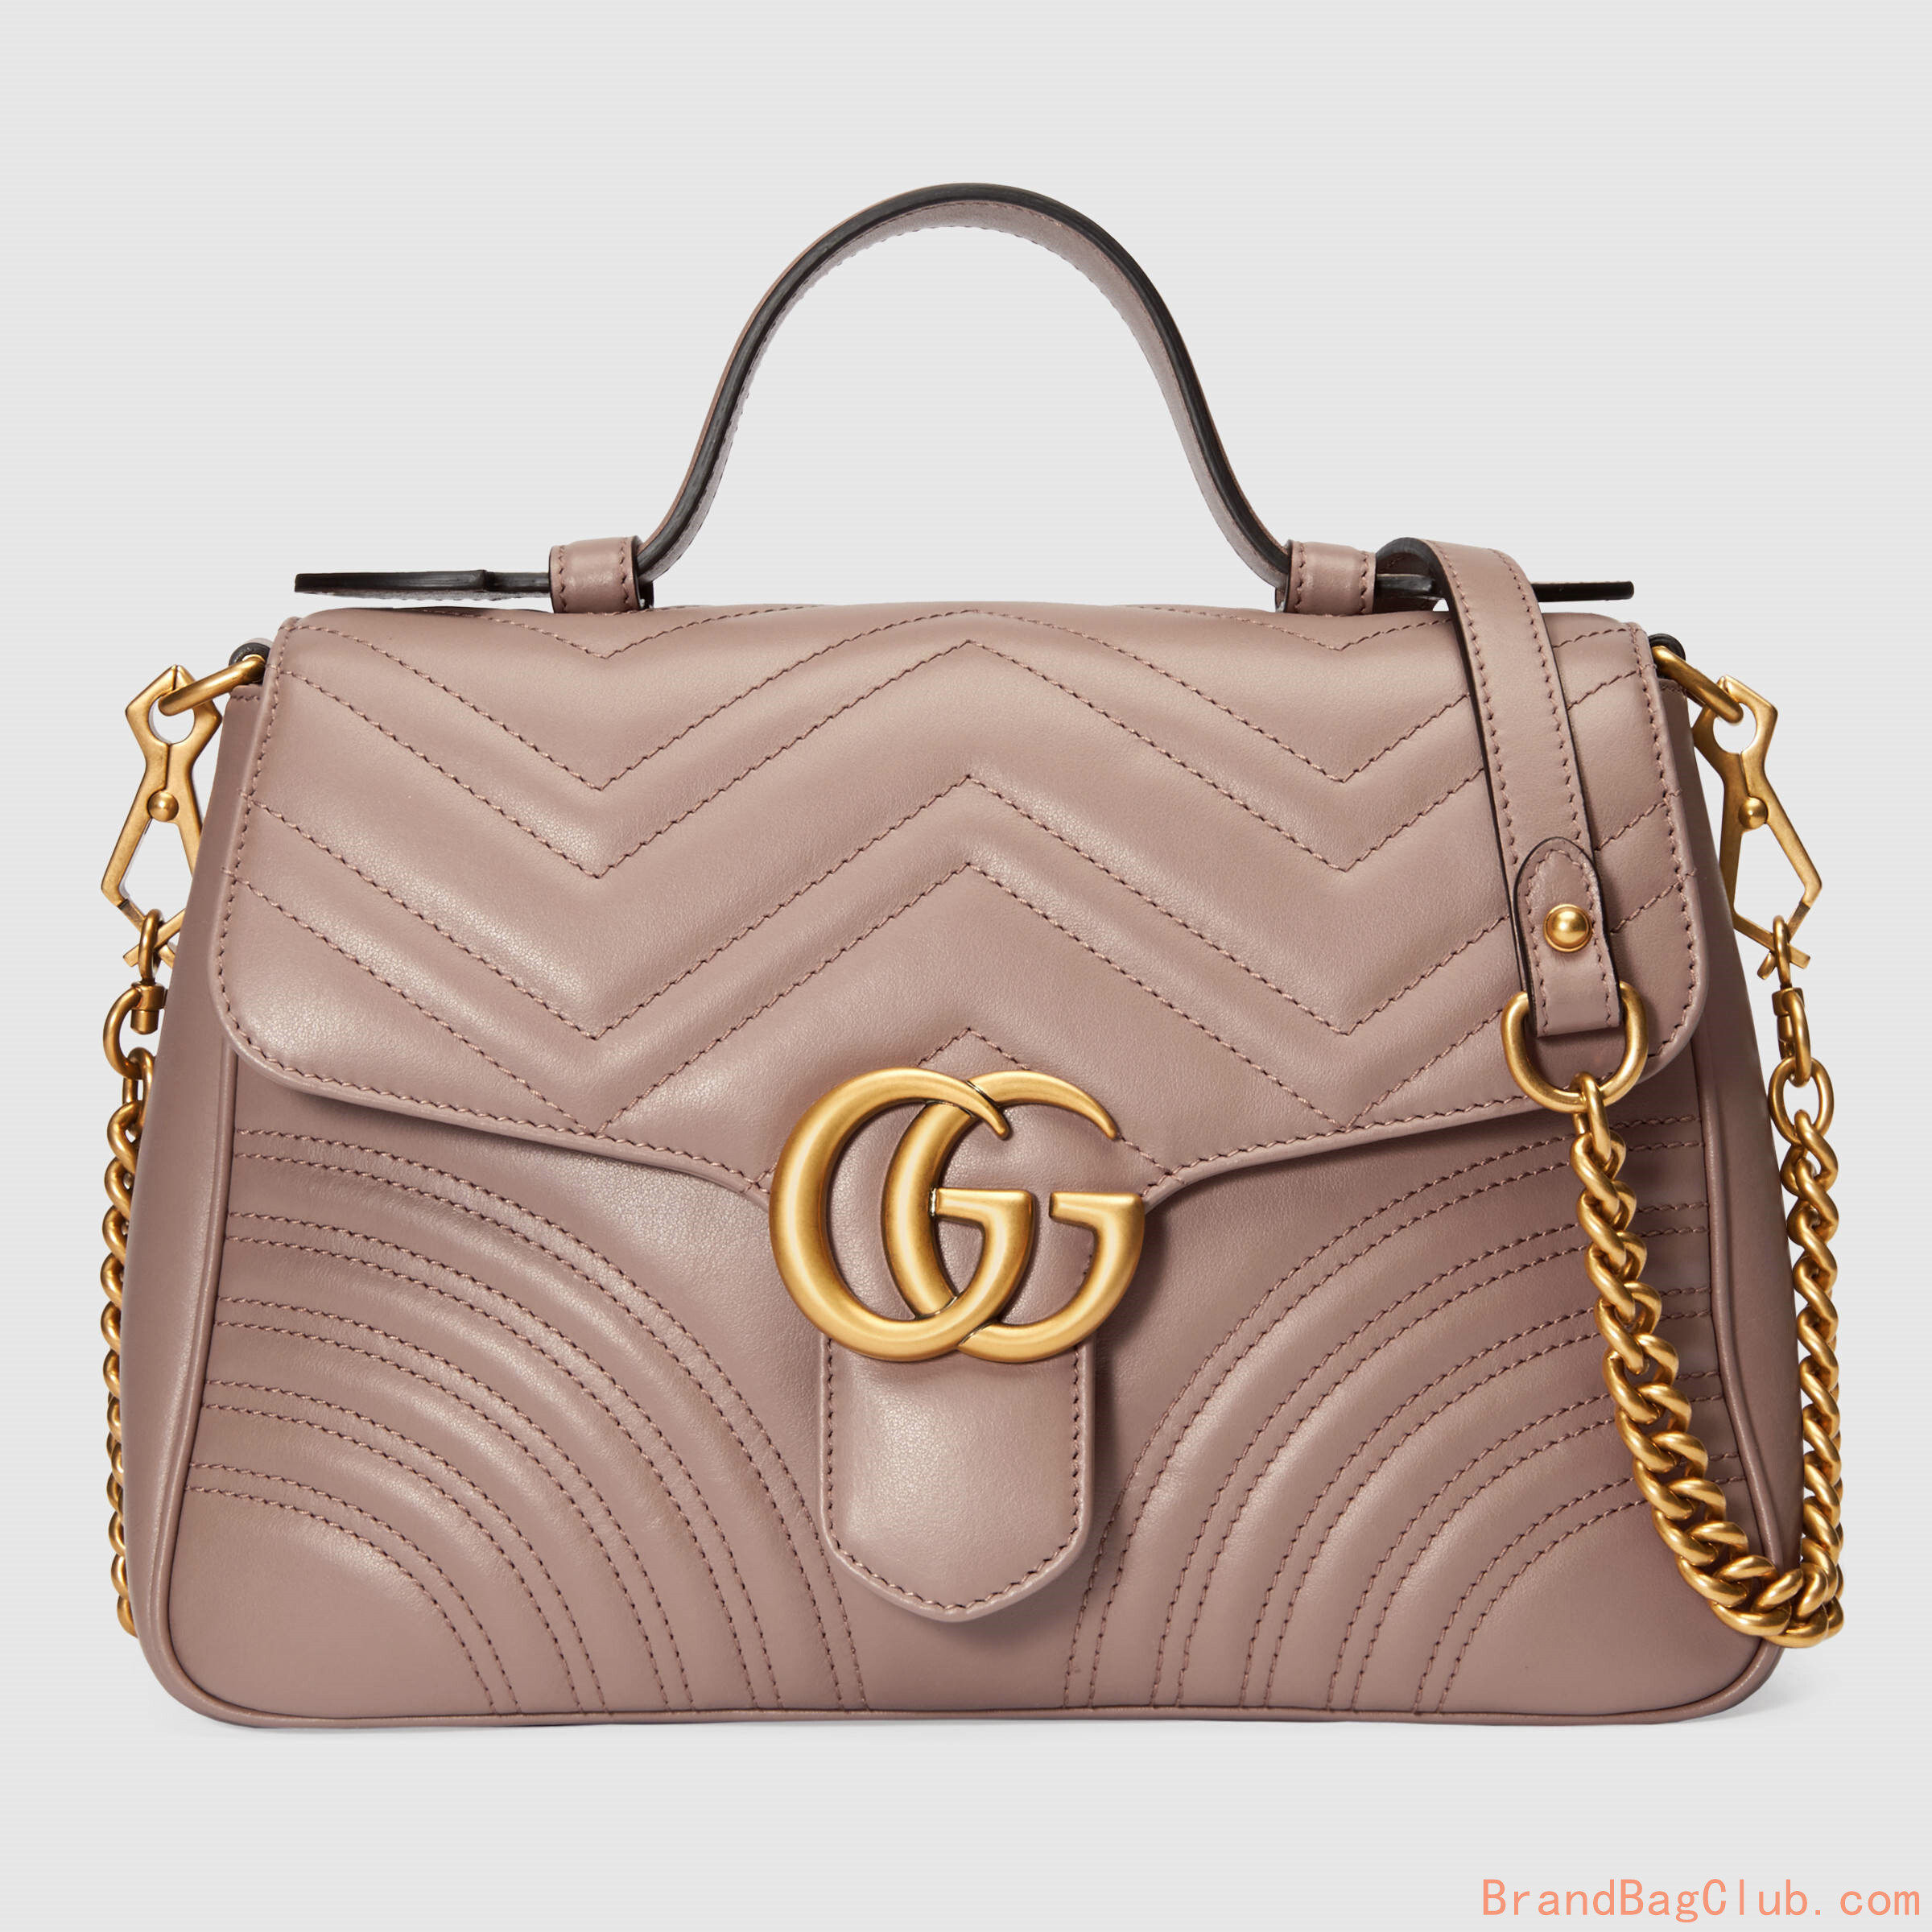 GG Marmont small top handle bag Cheap gucci bags gucci ladies handbags leather 498110 dusty pink ...